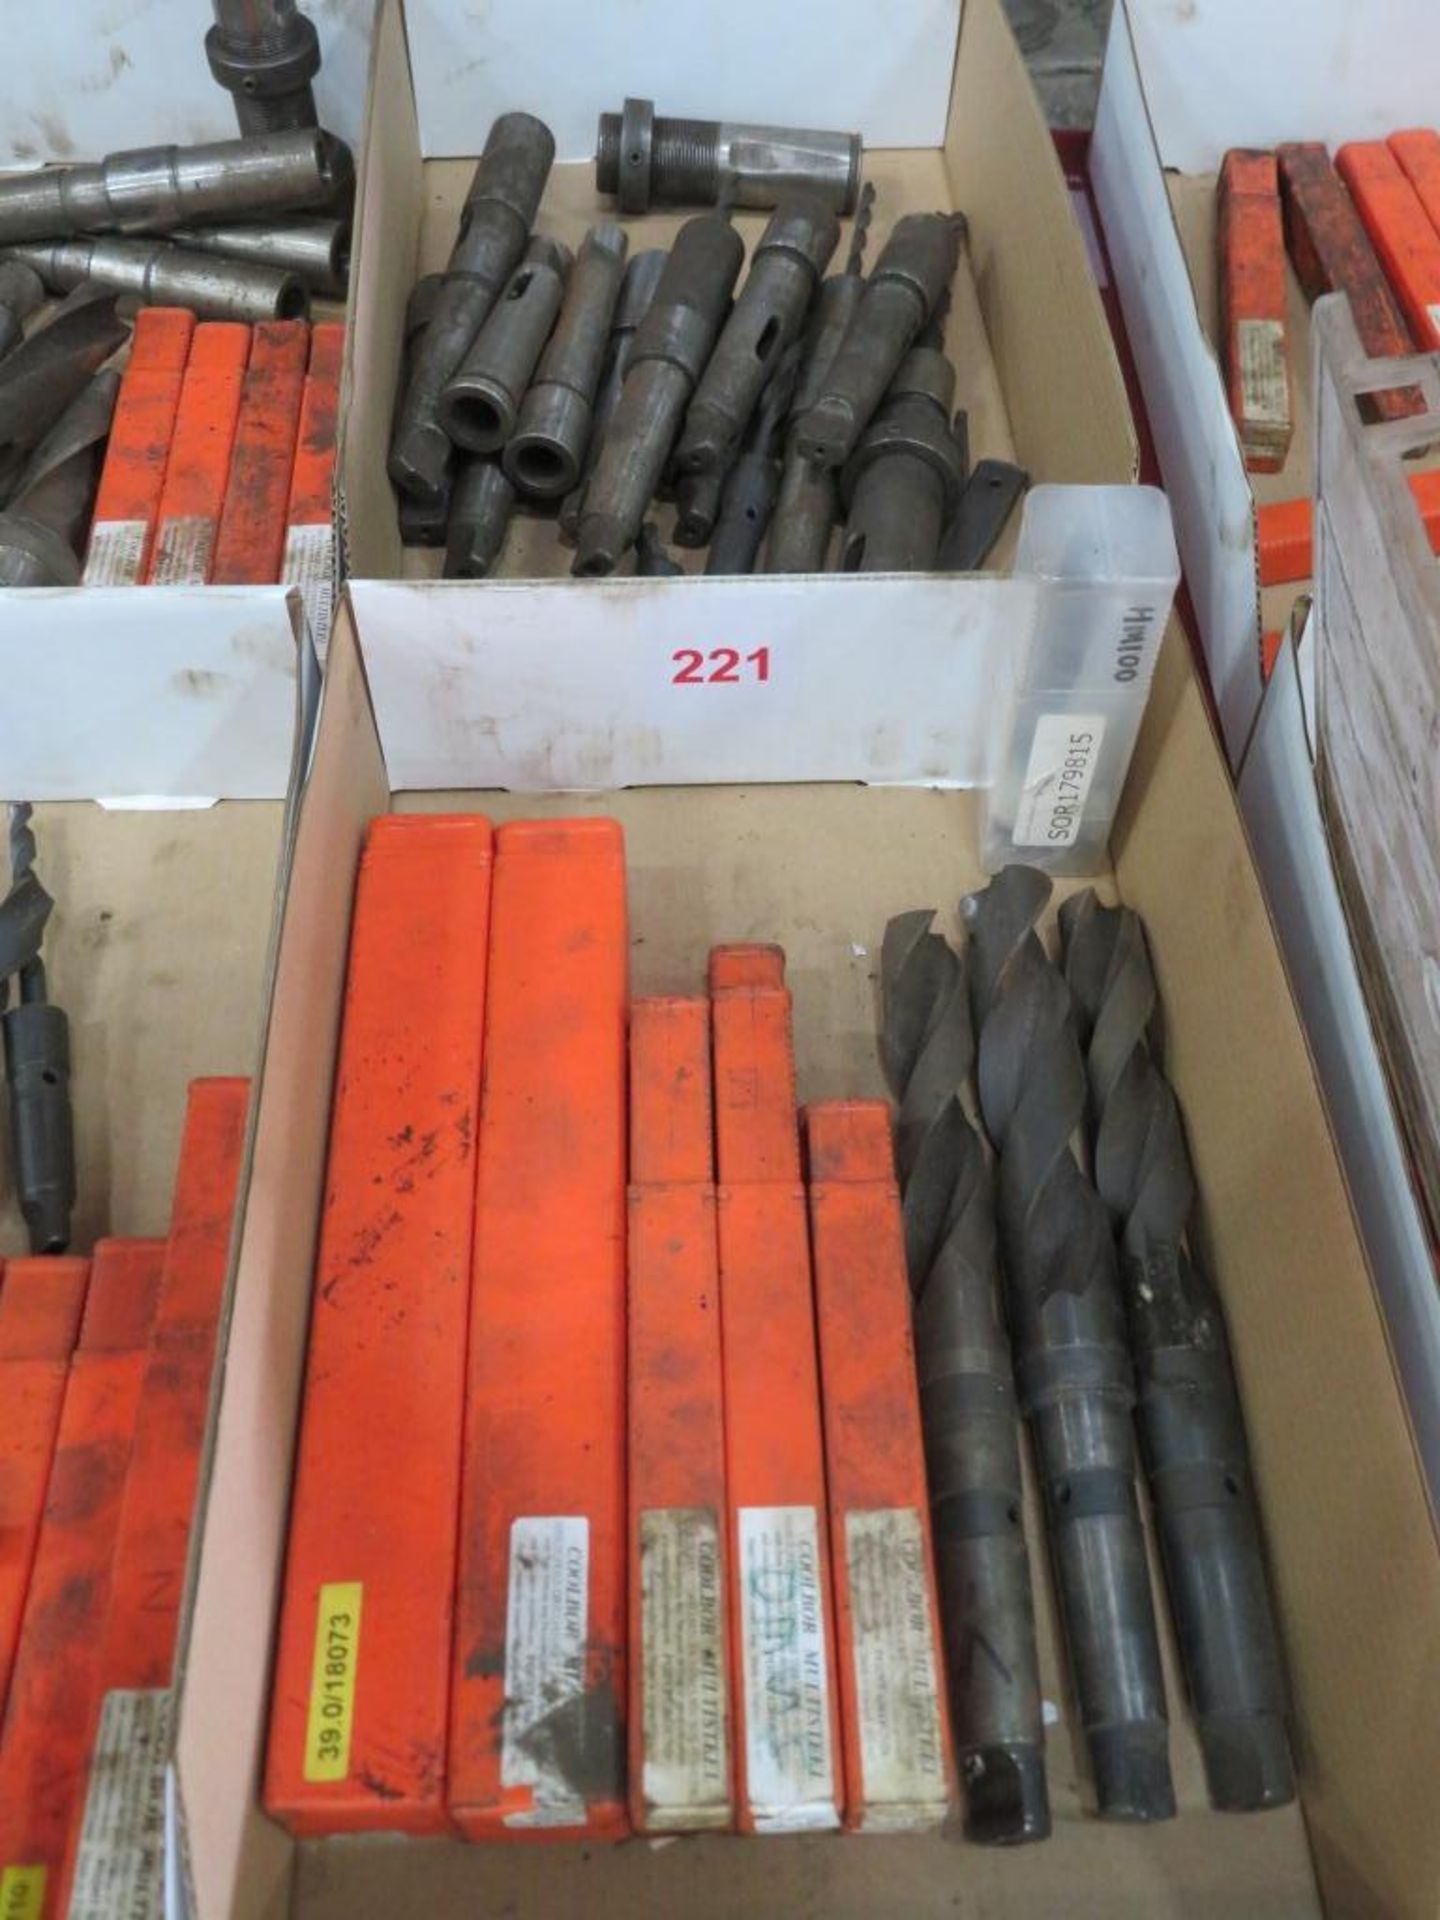 Drill bits in two tote bins